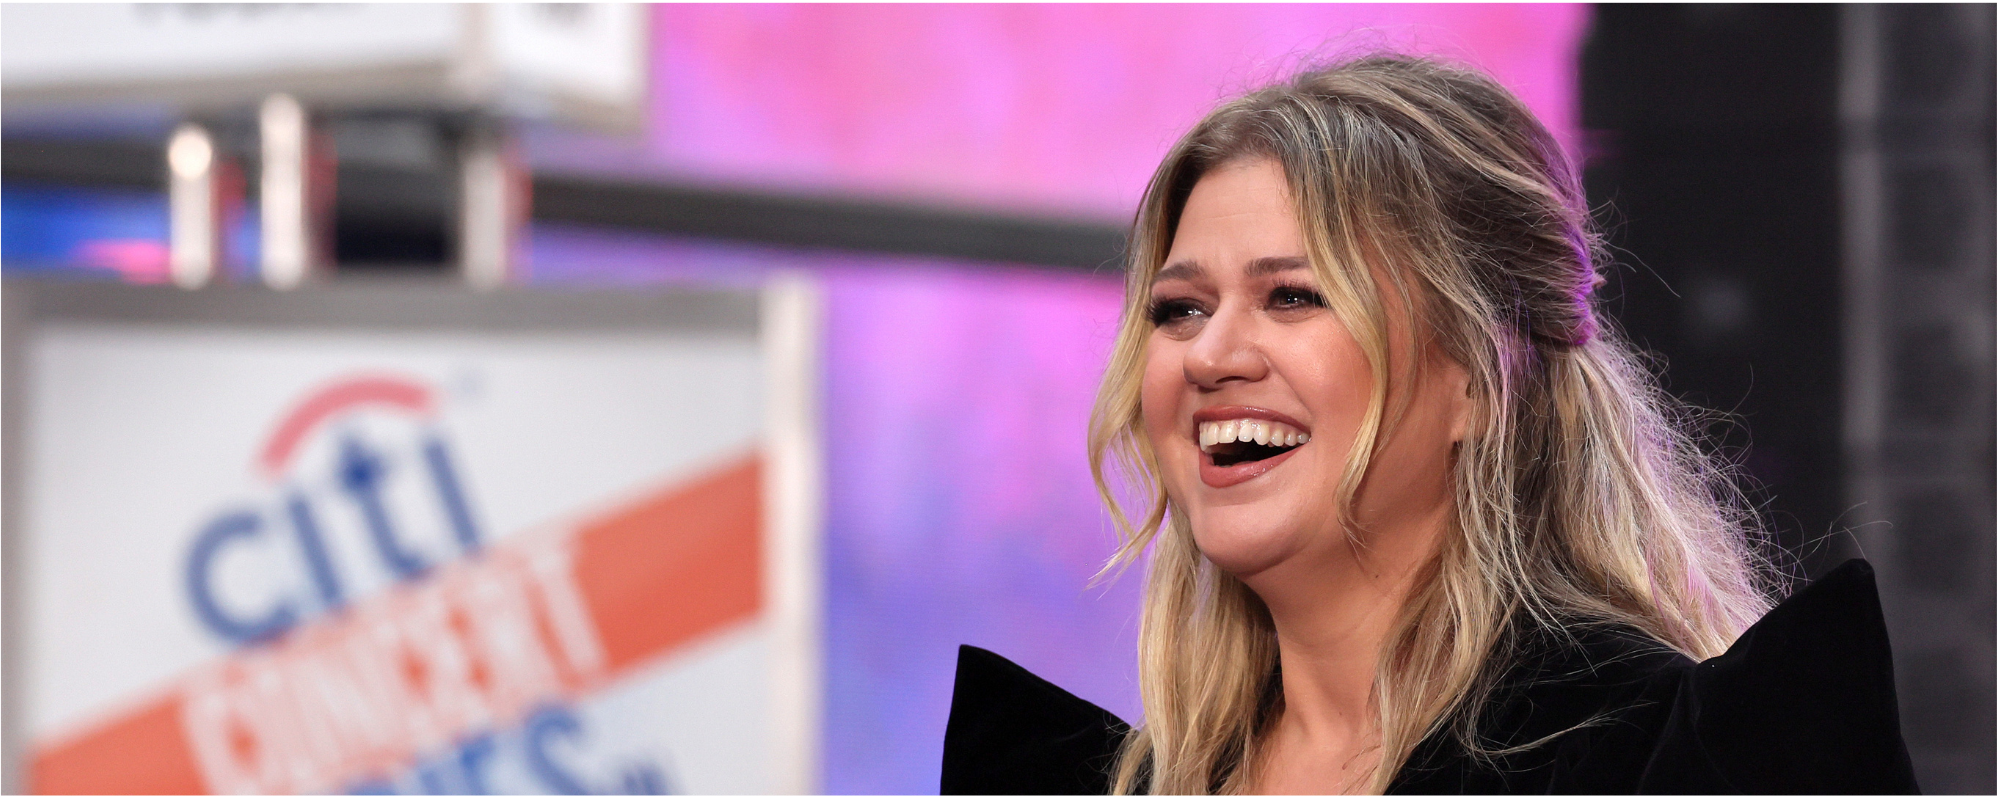 Kelly Clarkson Brings Positive Energy with Kellyoke Cover of “Unwritten” by Natasha Bedingfield